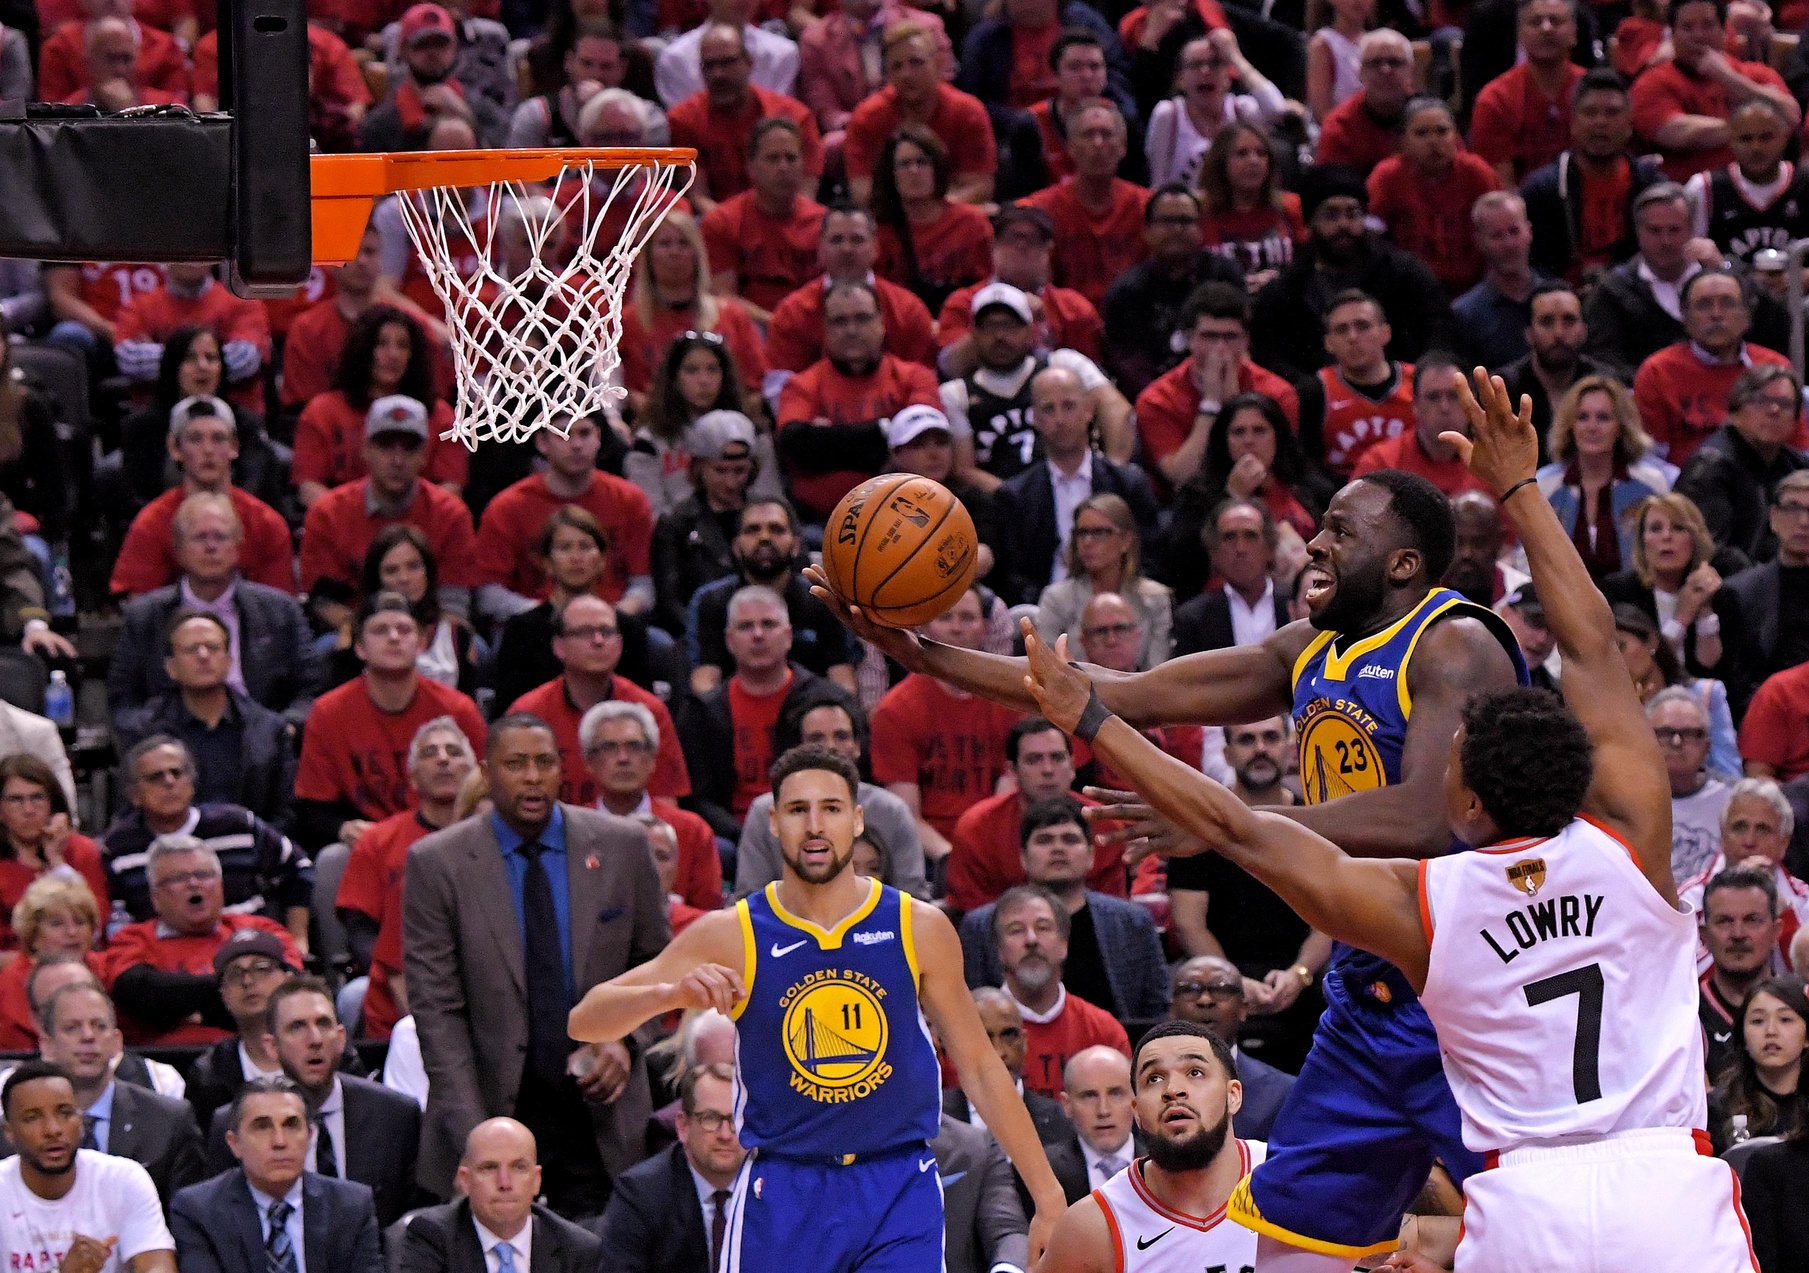 PointsBet Has Set Early Betting Lines for Game 3 of the NBA Finals